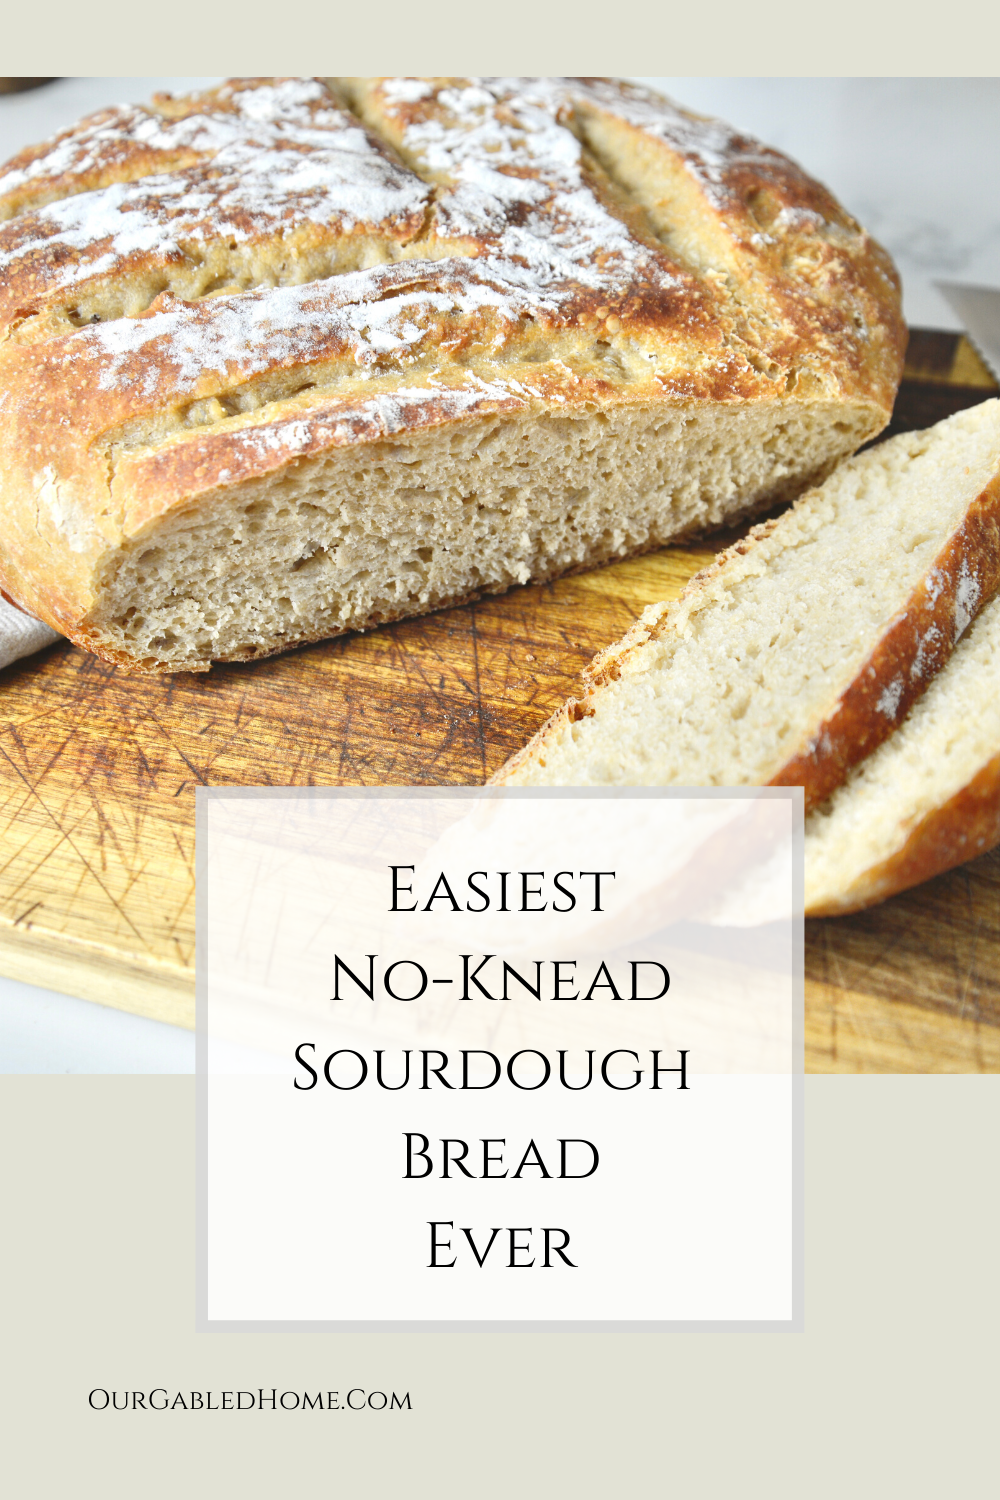 https://www.ourgabledhome.com/wp-content/uploads/2020/05/EasyNo-KneadSourdoughBreadPin1.png?fit=640%2C960&ssl=1